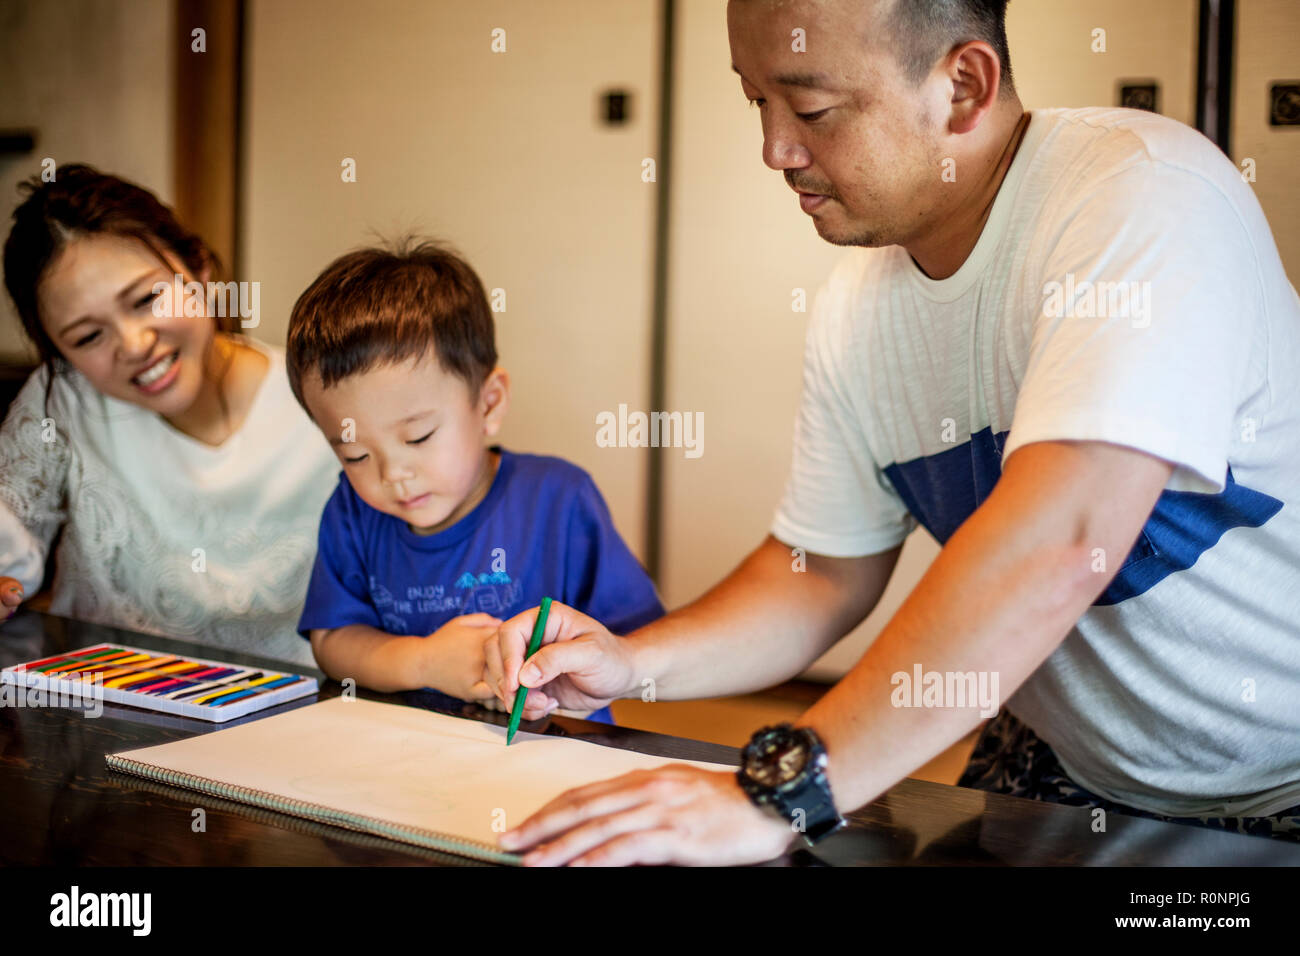 Japanese woman, man and little boy sitting at a table, drawing with colouring pens. Stock Photo